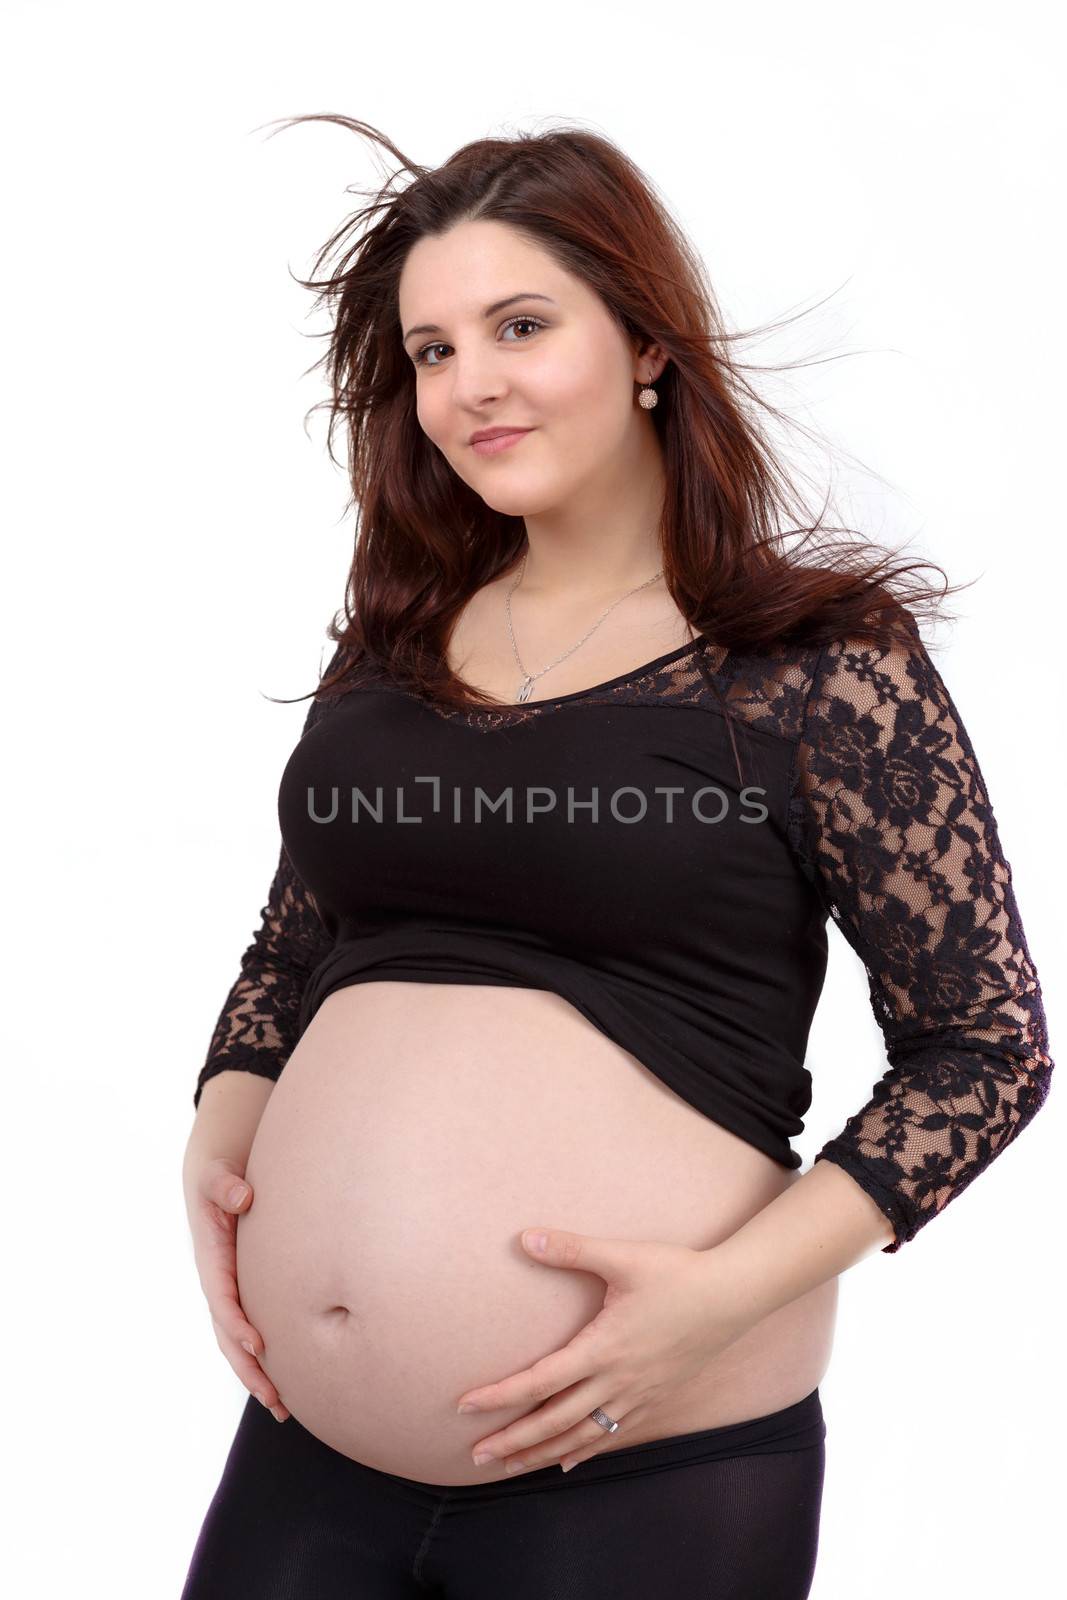 beautiful smiling pregnant woman tenderly holding her tummy isolated on white background